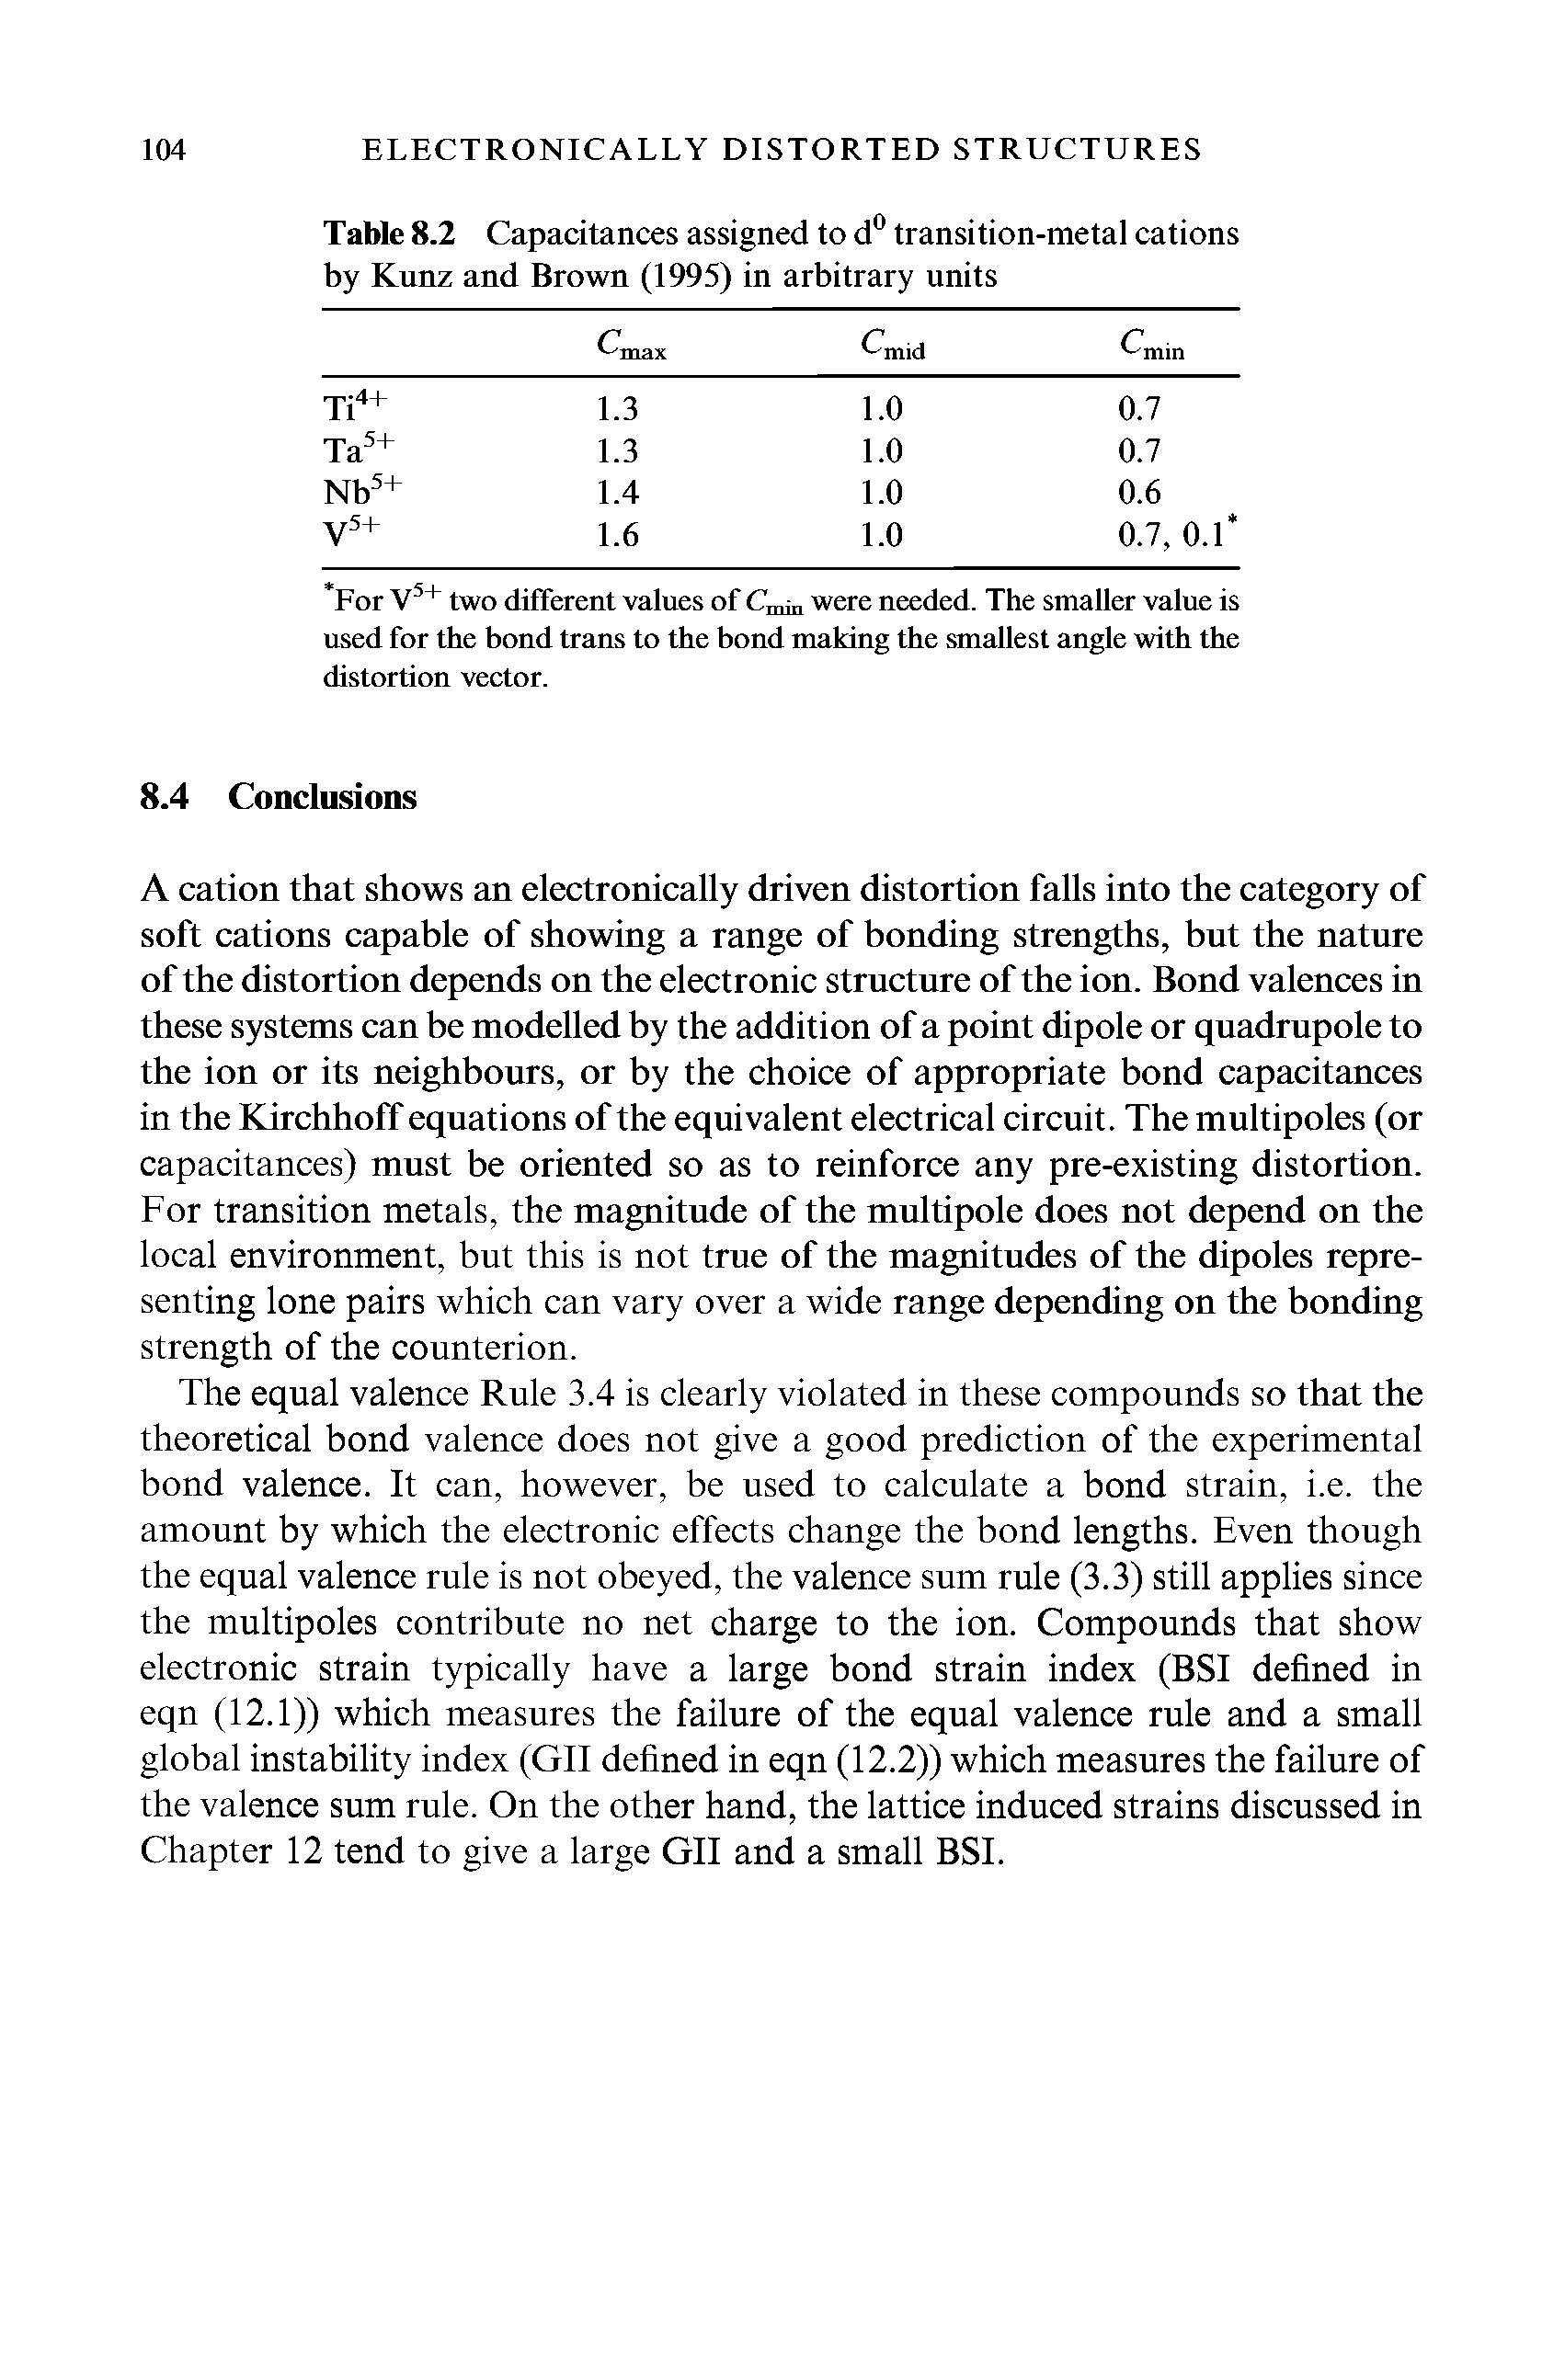 Table 8.2 Capacitances assigned to d transition-metal cations by Kunz and Brown (1995) in arbitrary units...